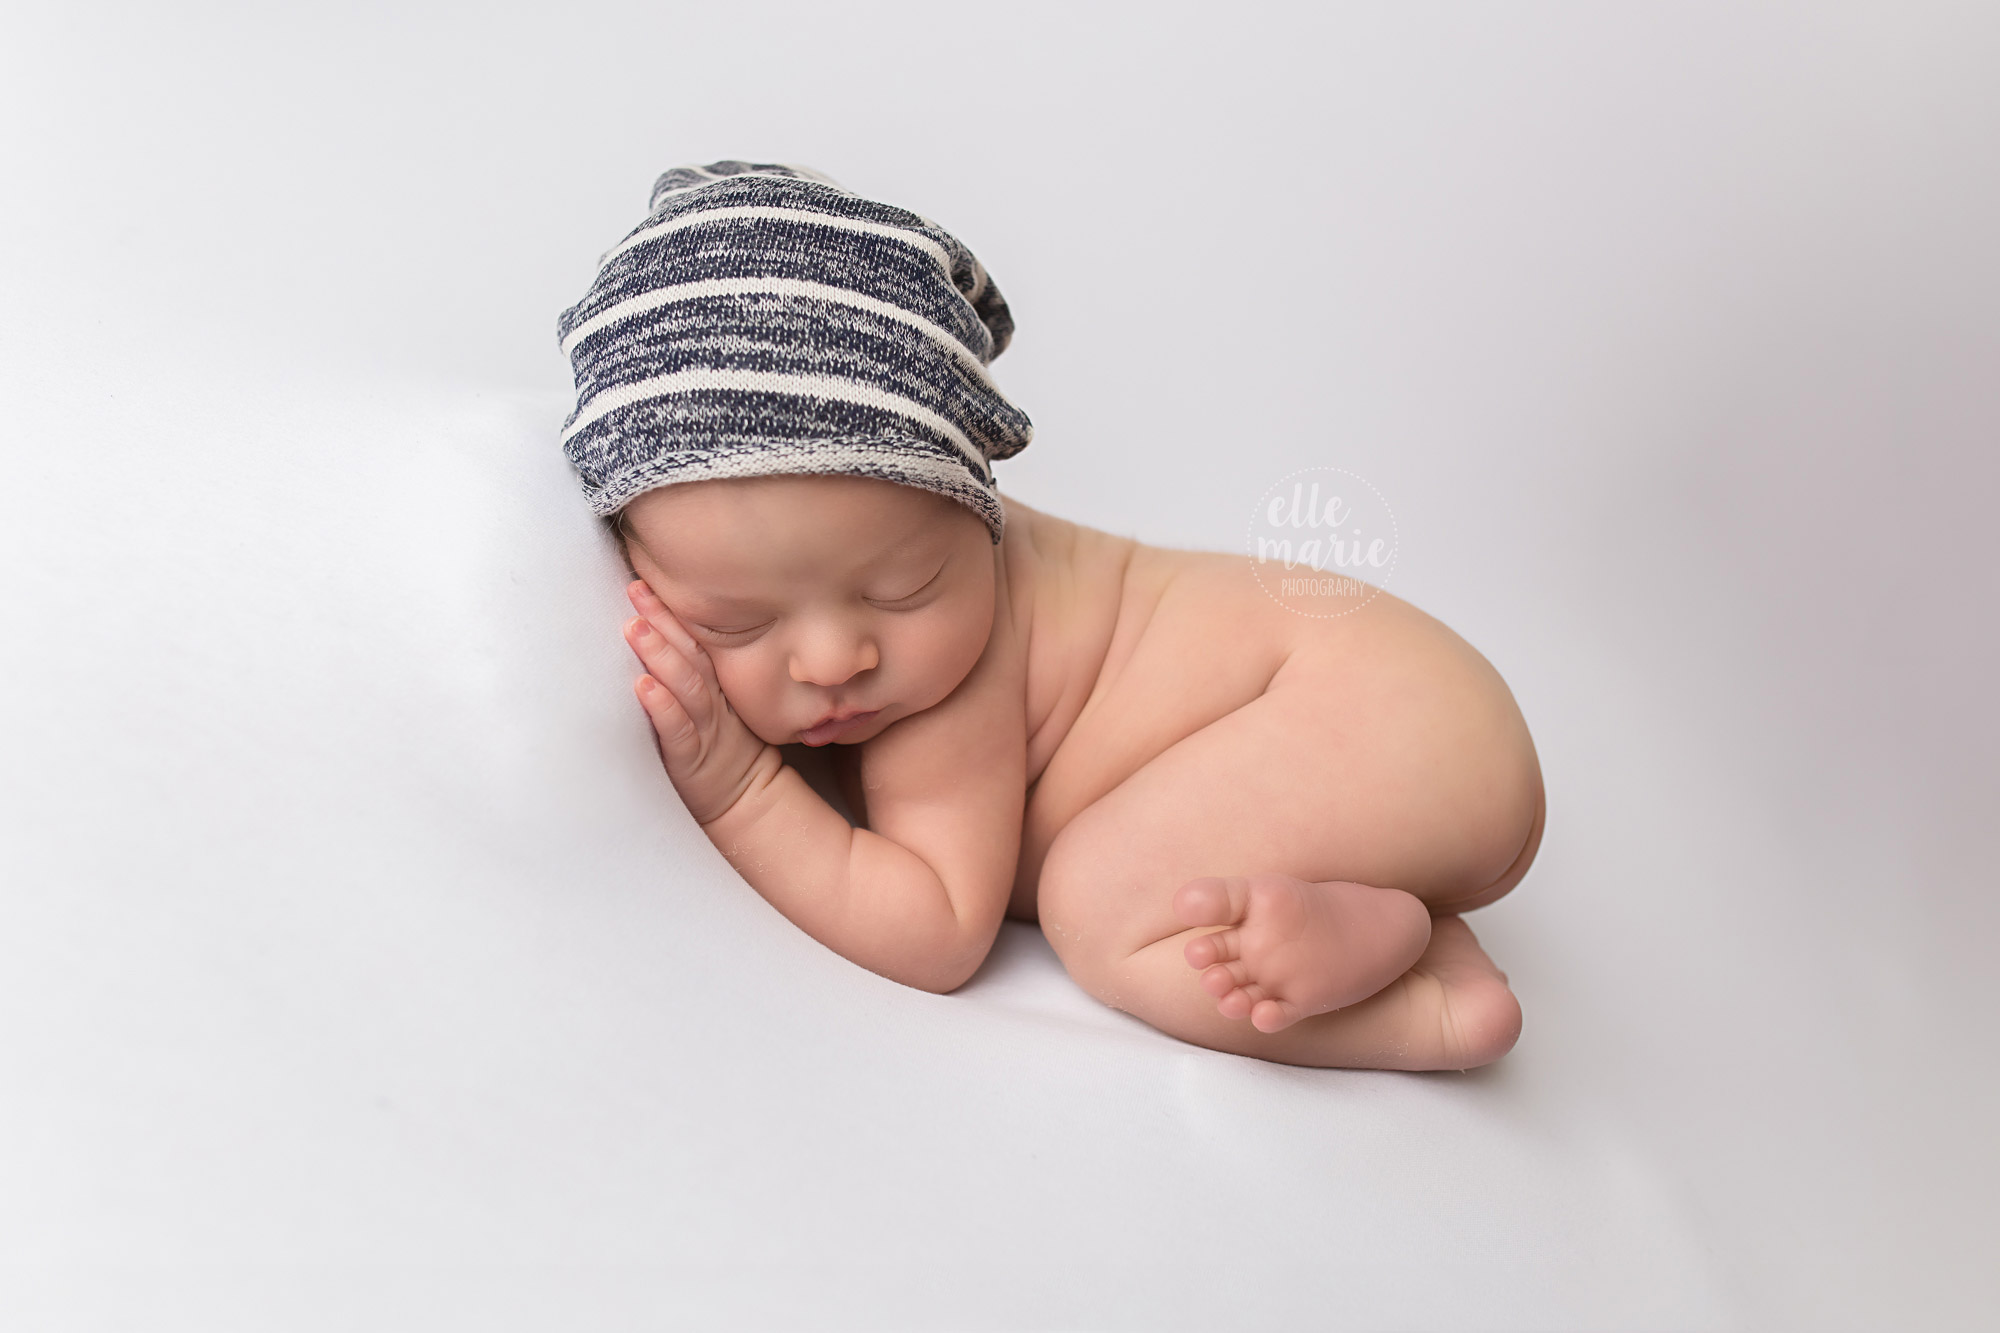 Baby in little hat taking a nap